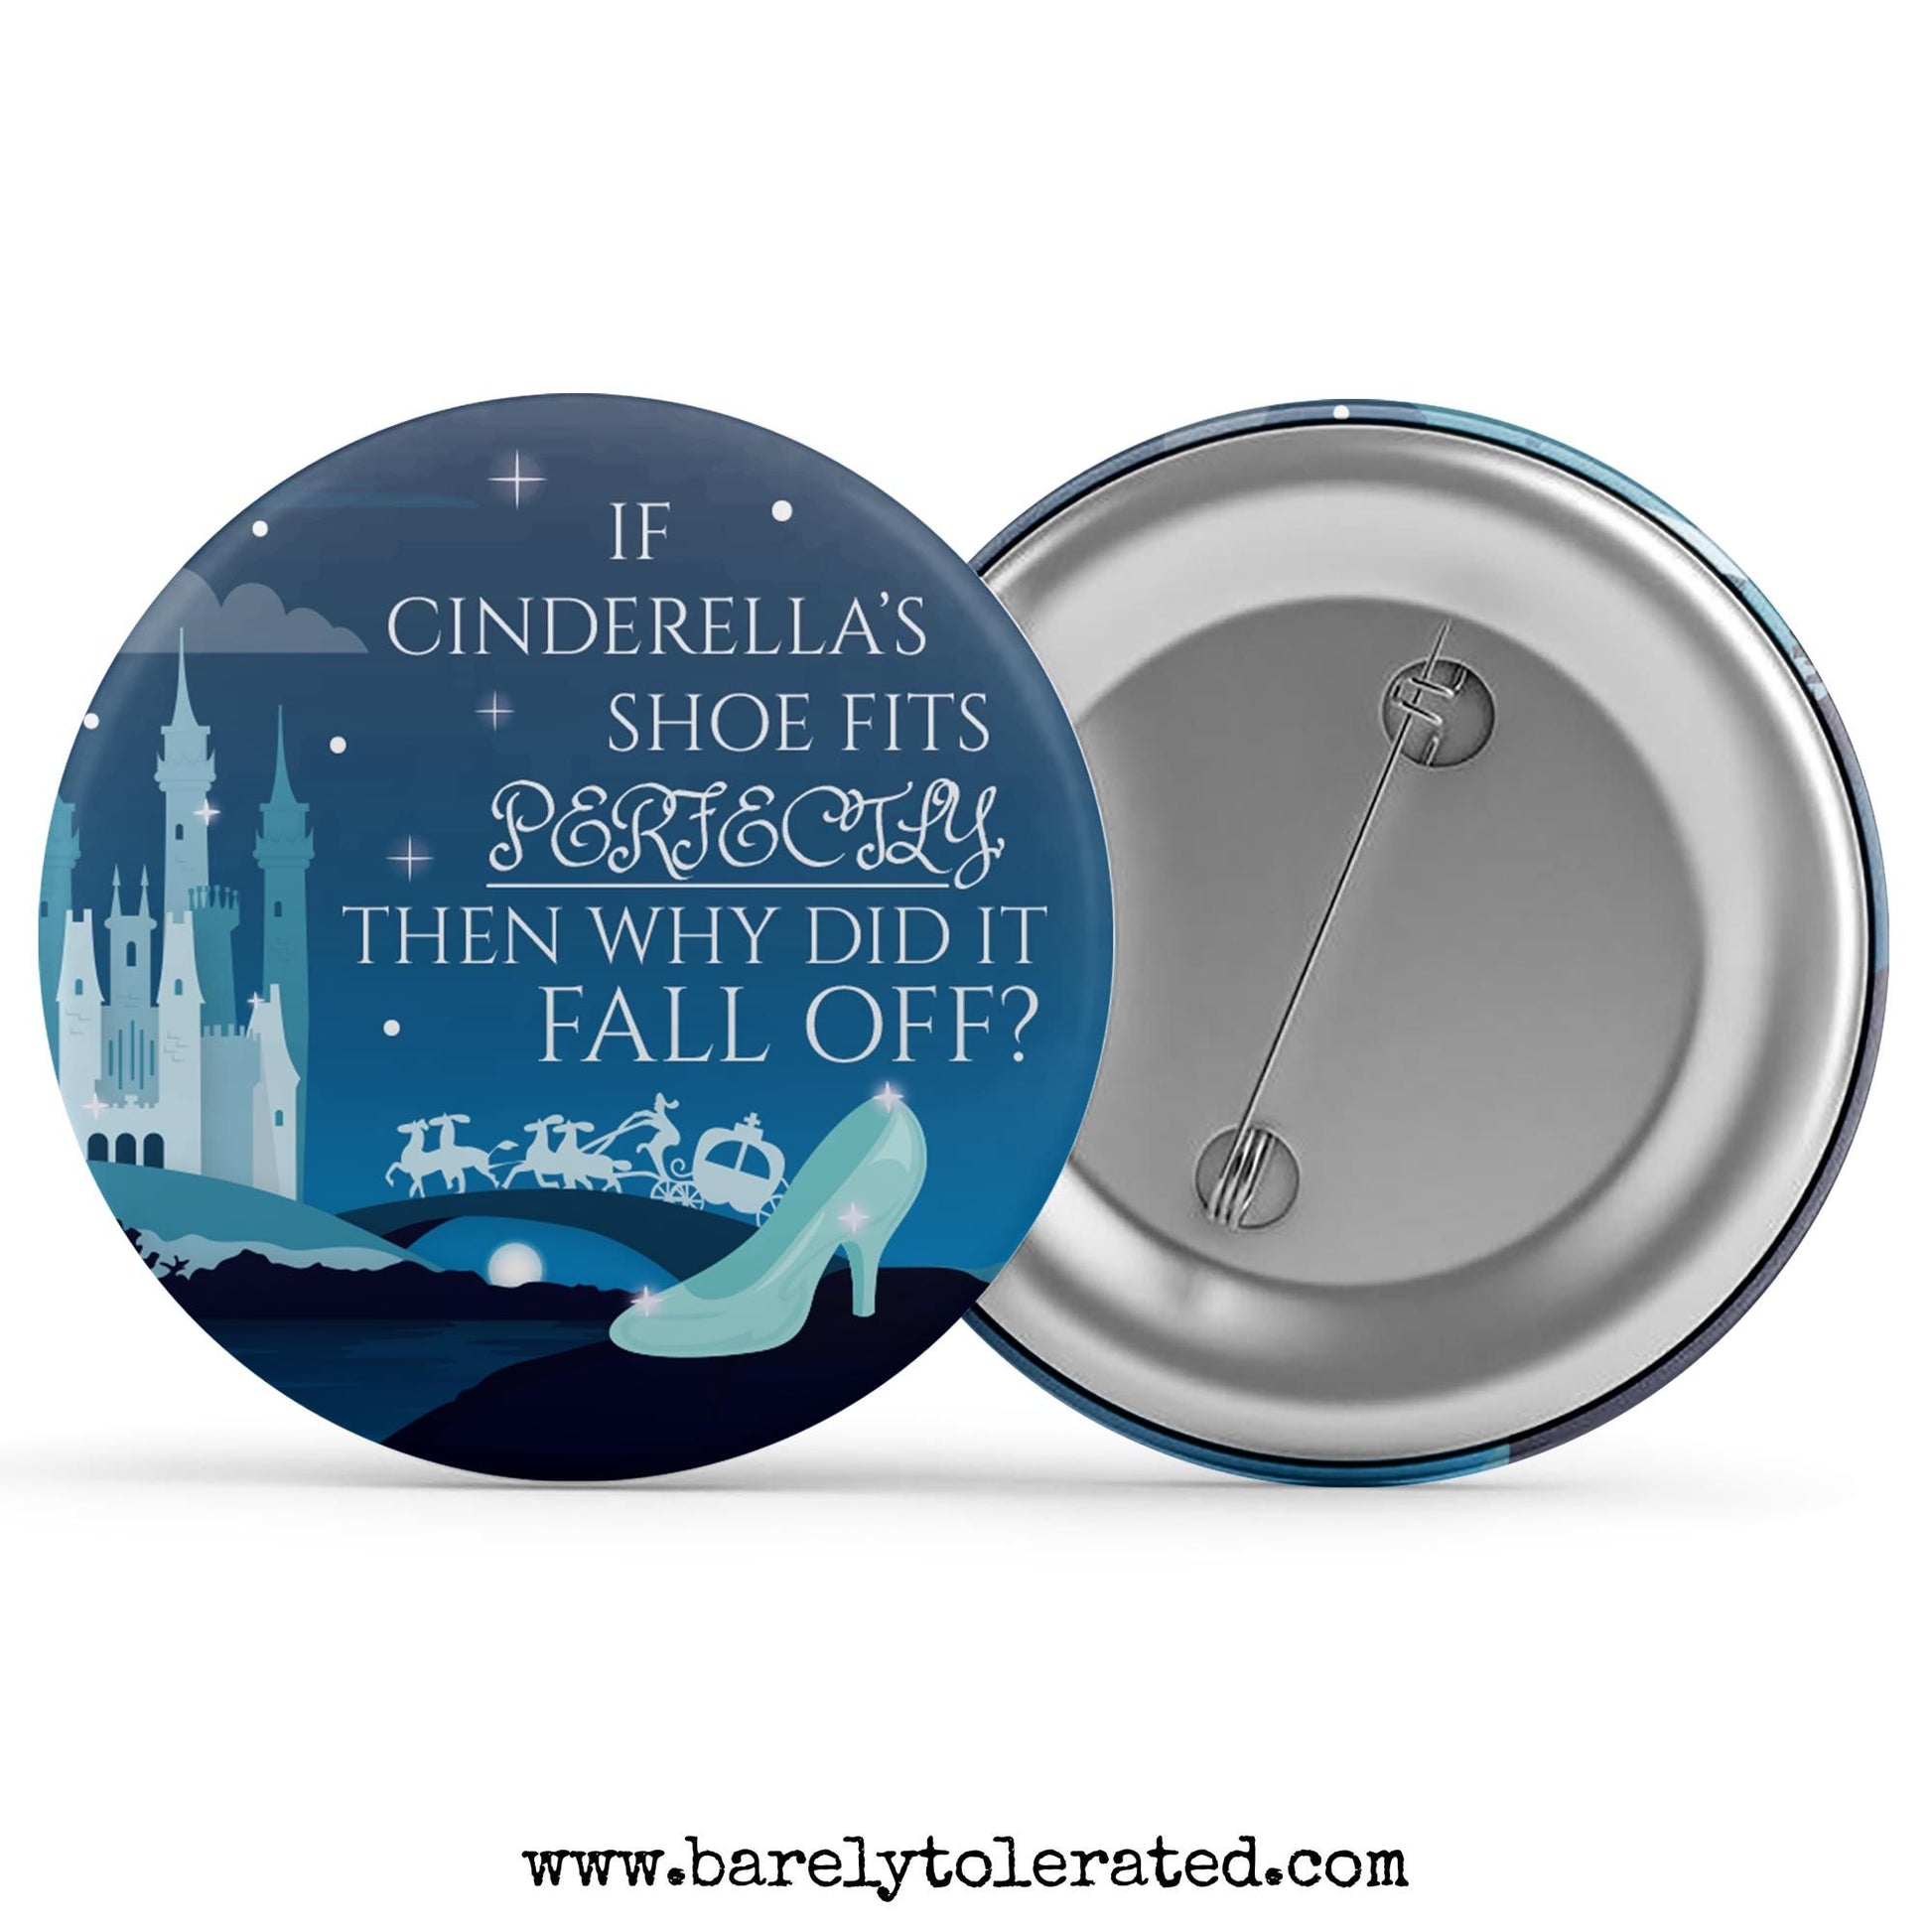 If Cinderella's Show Fits Perfectly... Image